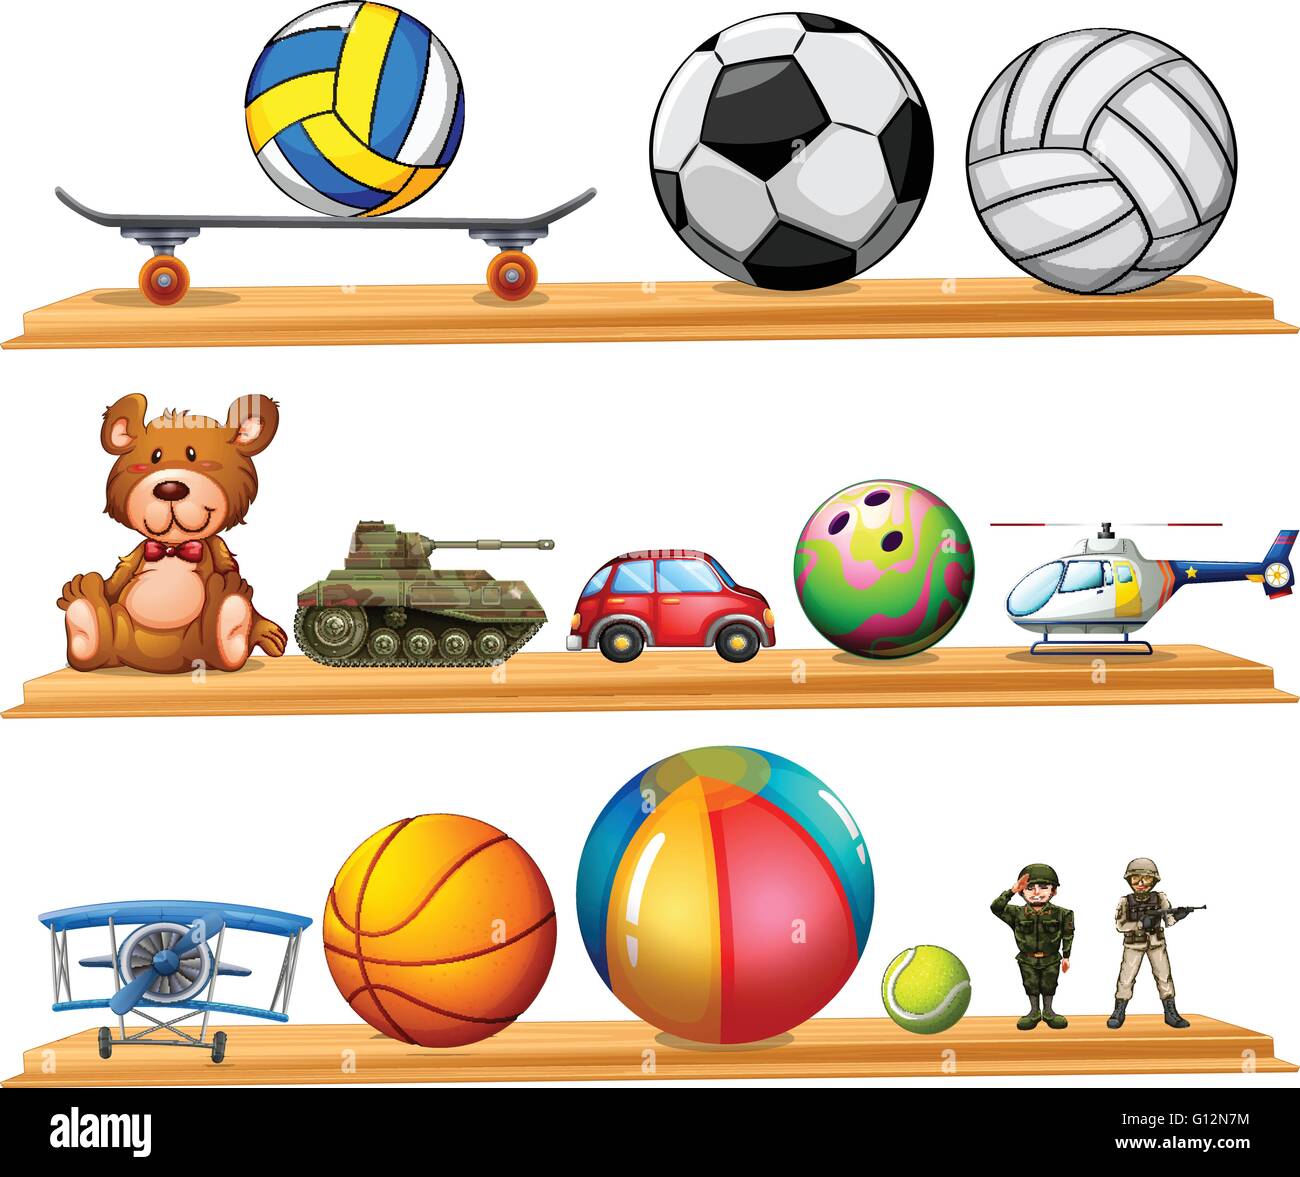 Ball set and other toys illustration Stock Vector